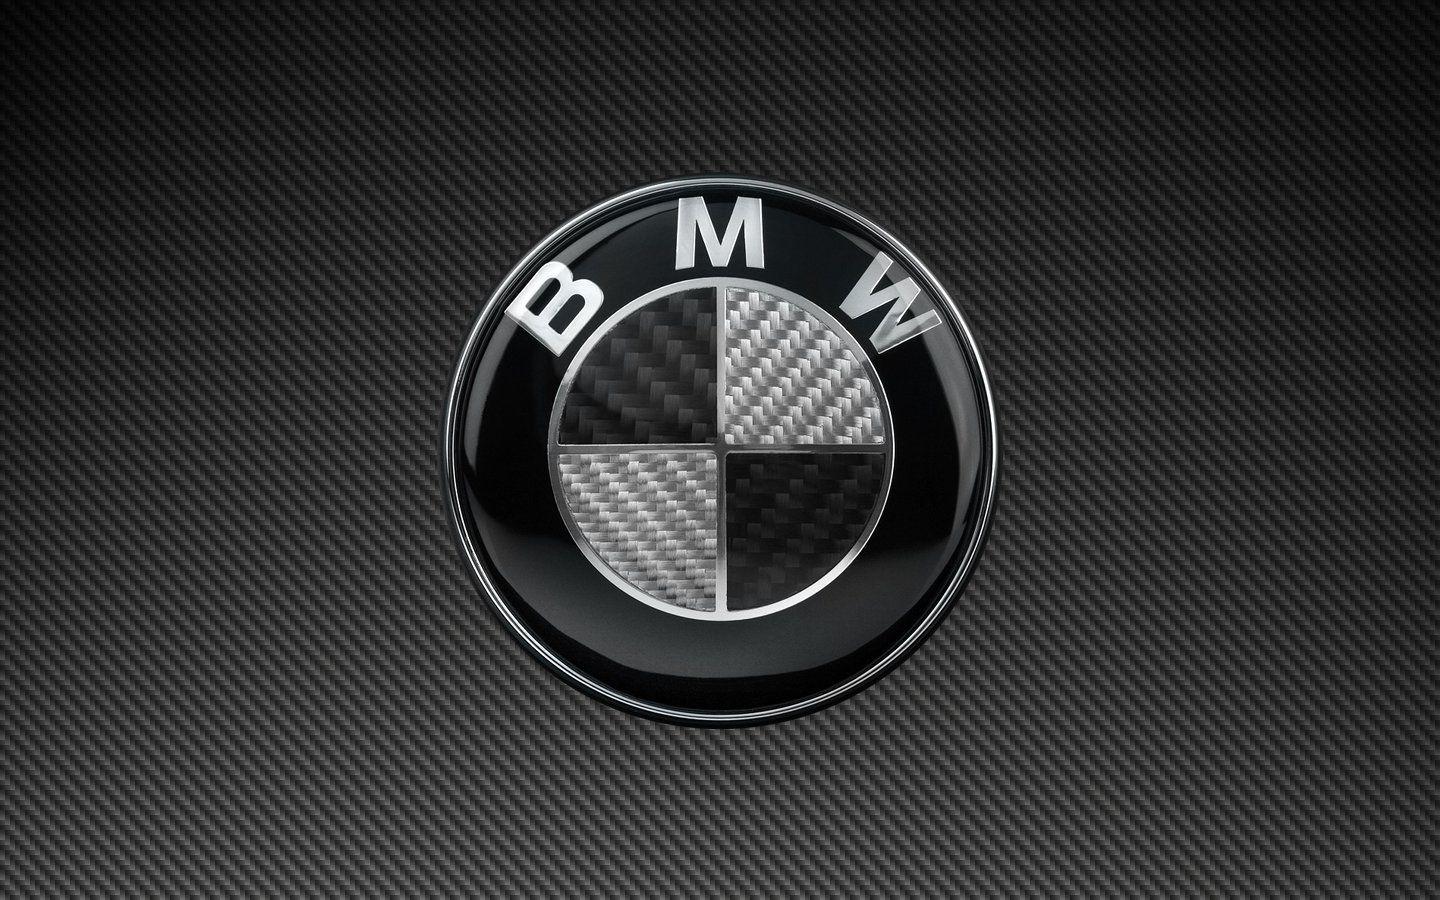 BMW LOGO WALLPAPER 4K HD Android Download for Free - LD SPACE